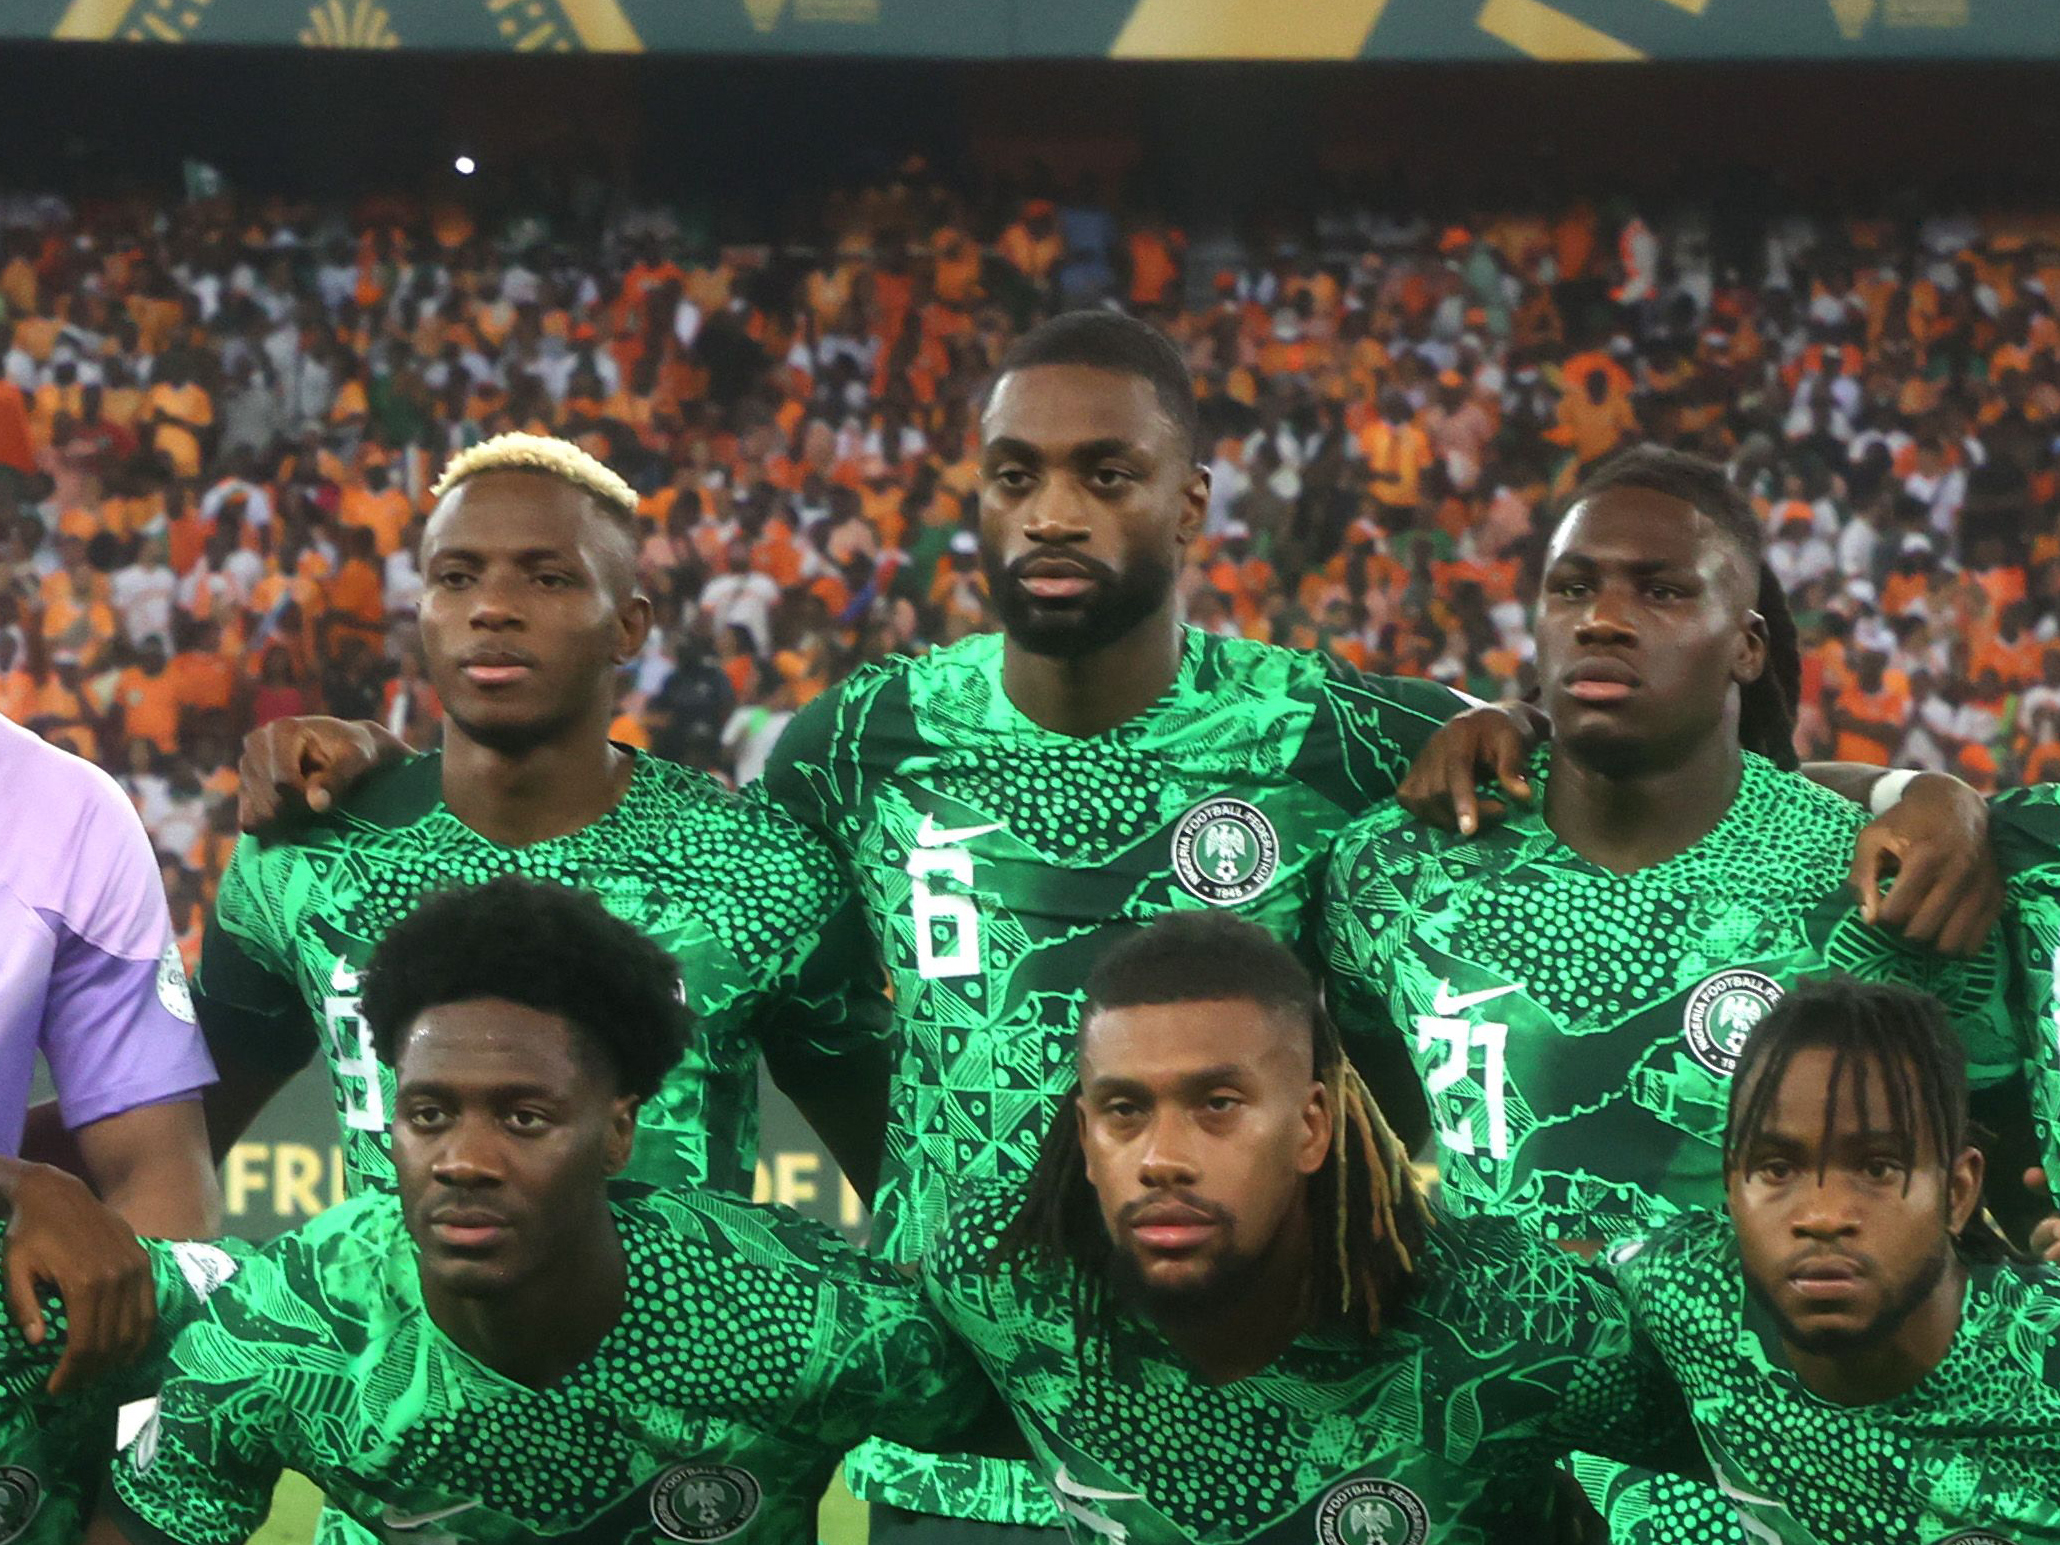 Semi Ajayi lining up for the Nigeria team photo before the start of the AFCON final